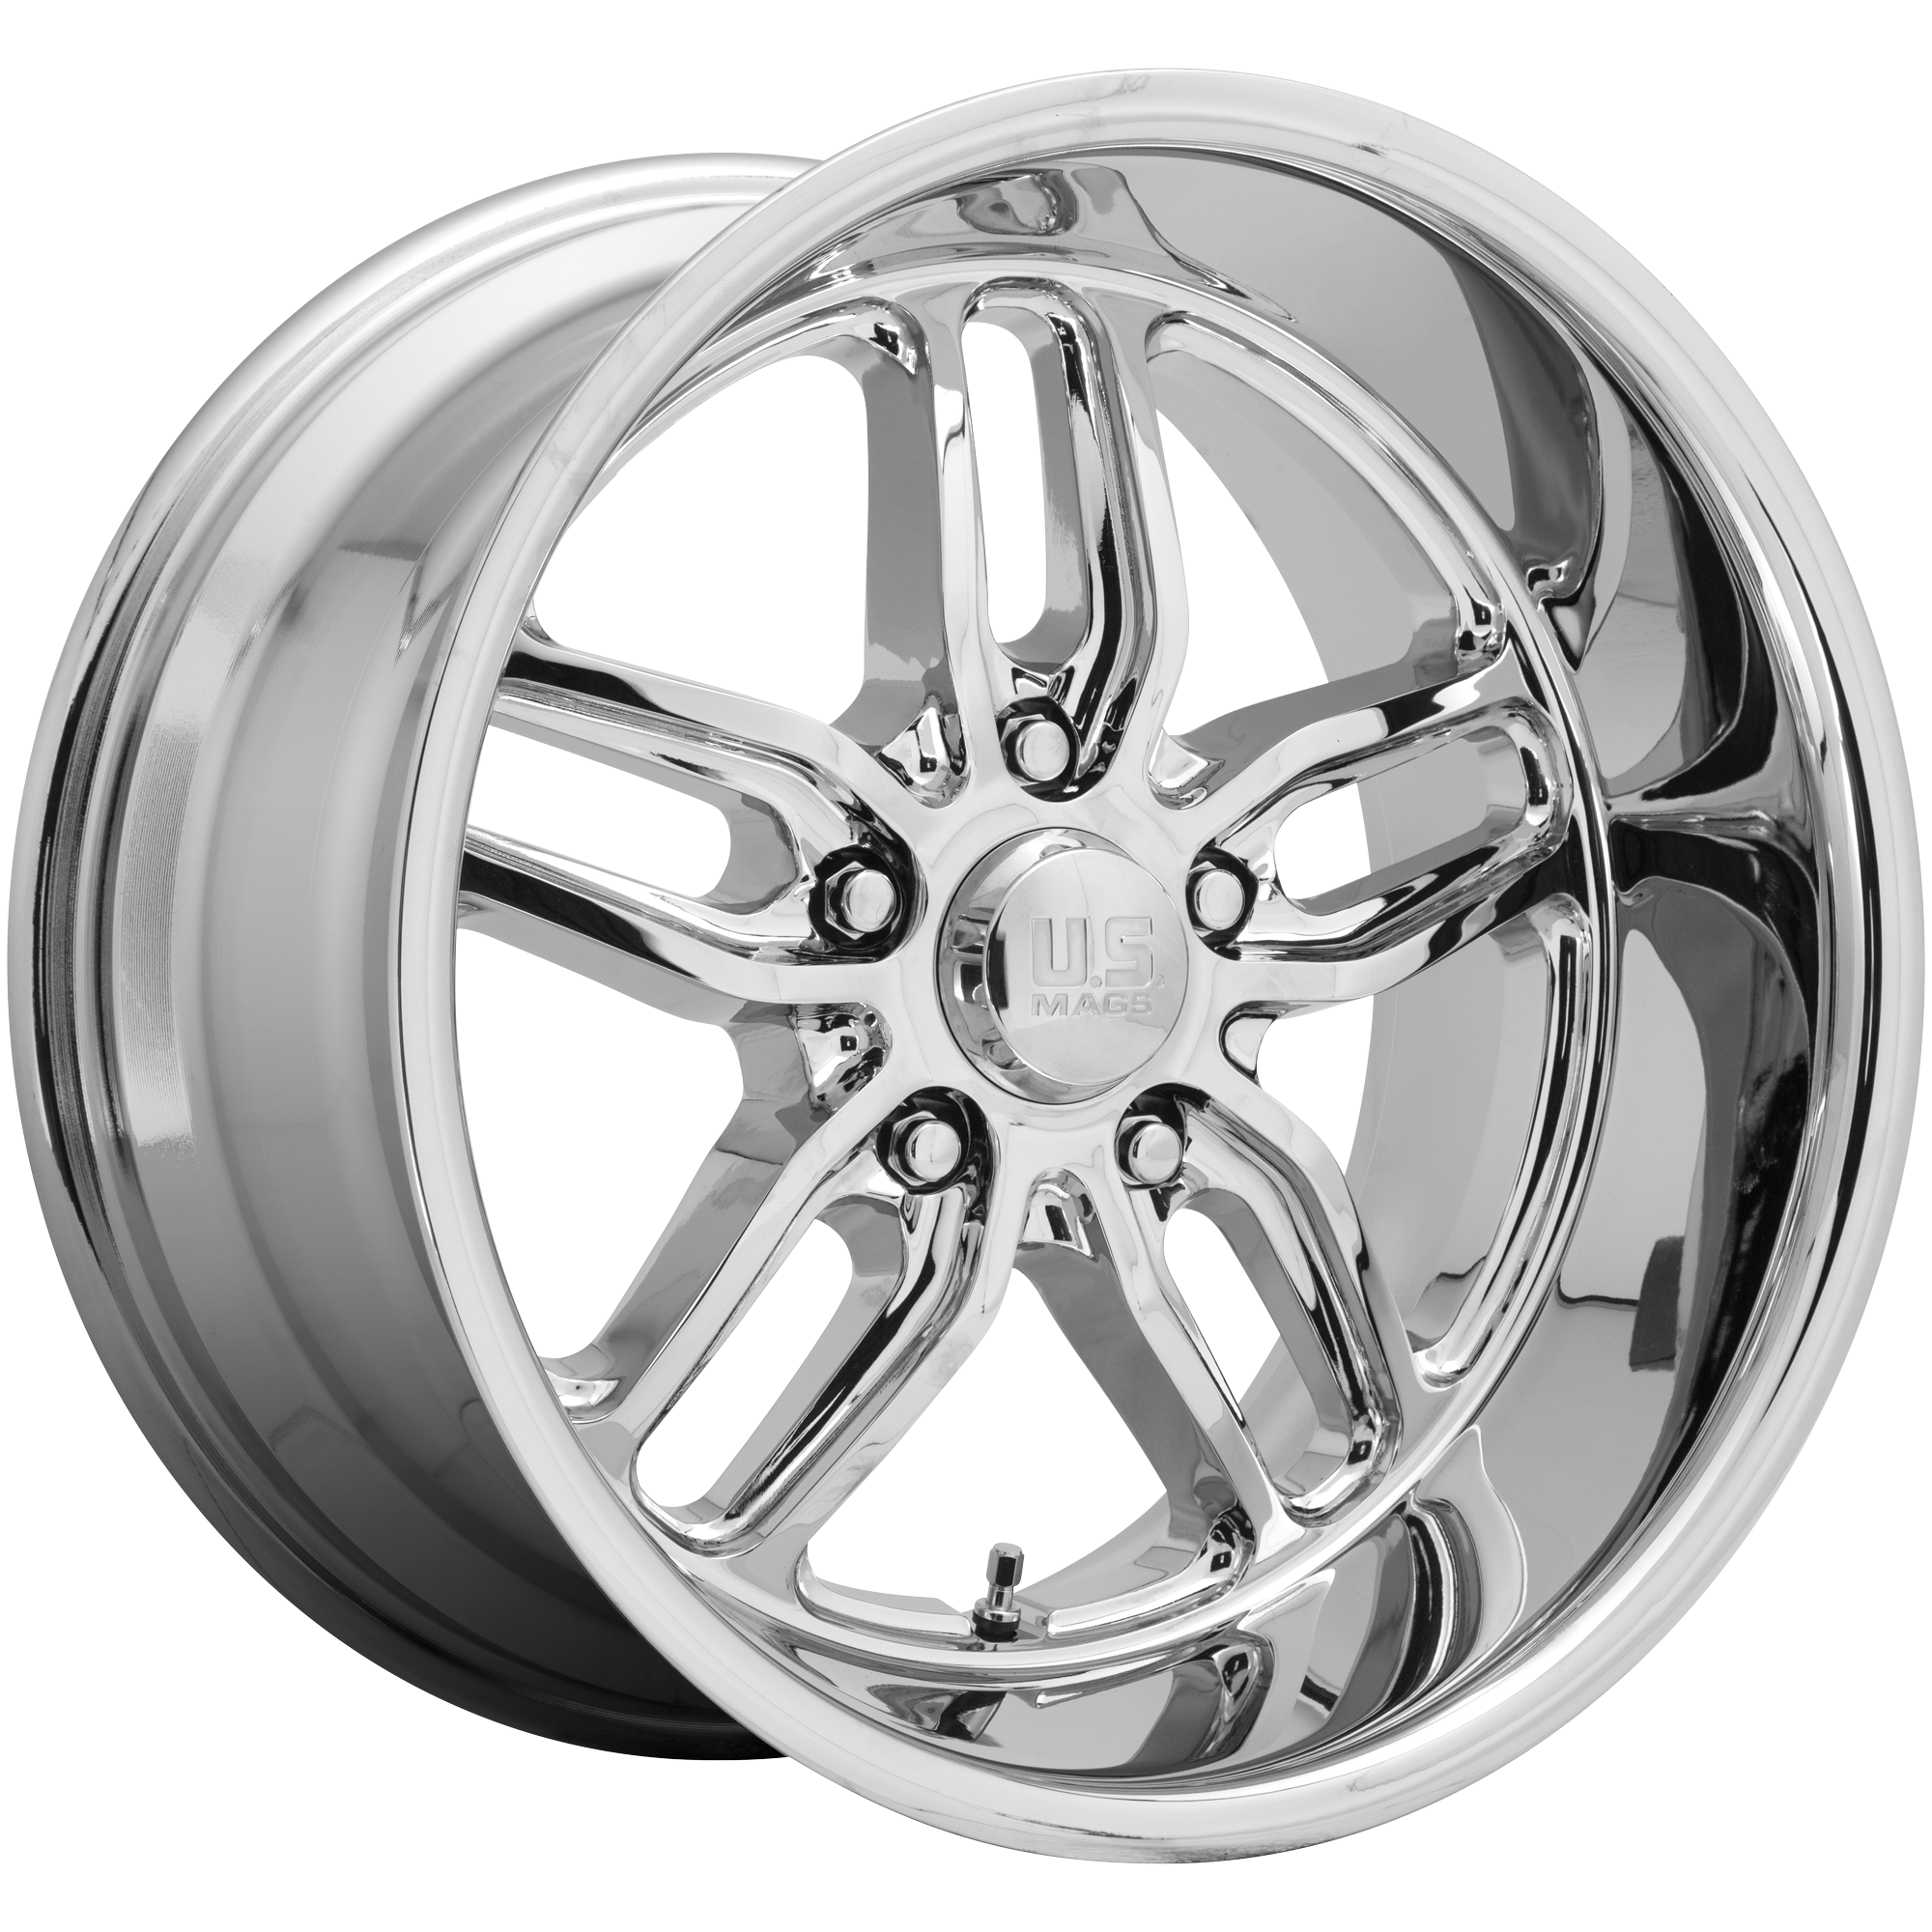 CTEN 20x10 5x127.00 CHROME PLATED (1 mm) - Tires and Engine Performance